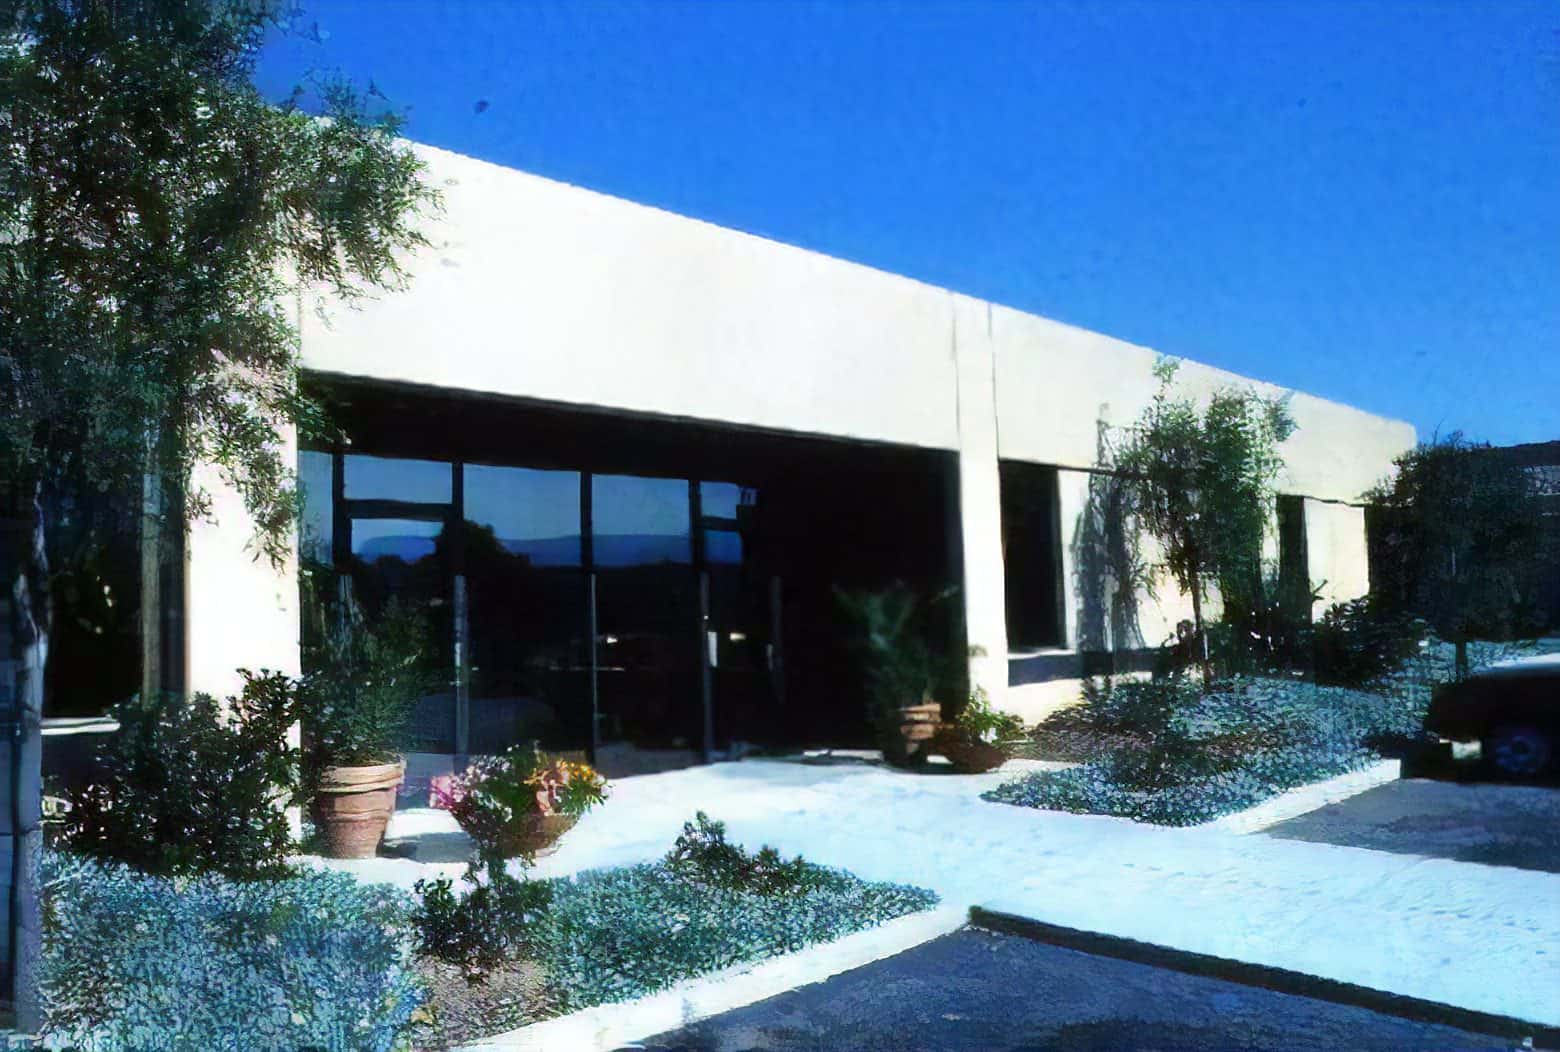 Bandley 1 was Apple's first purpose-built HQ.